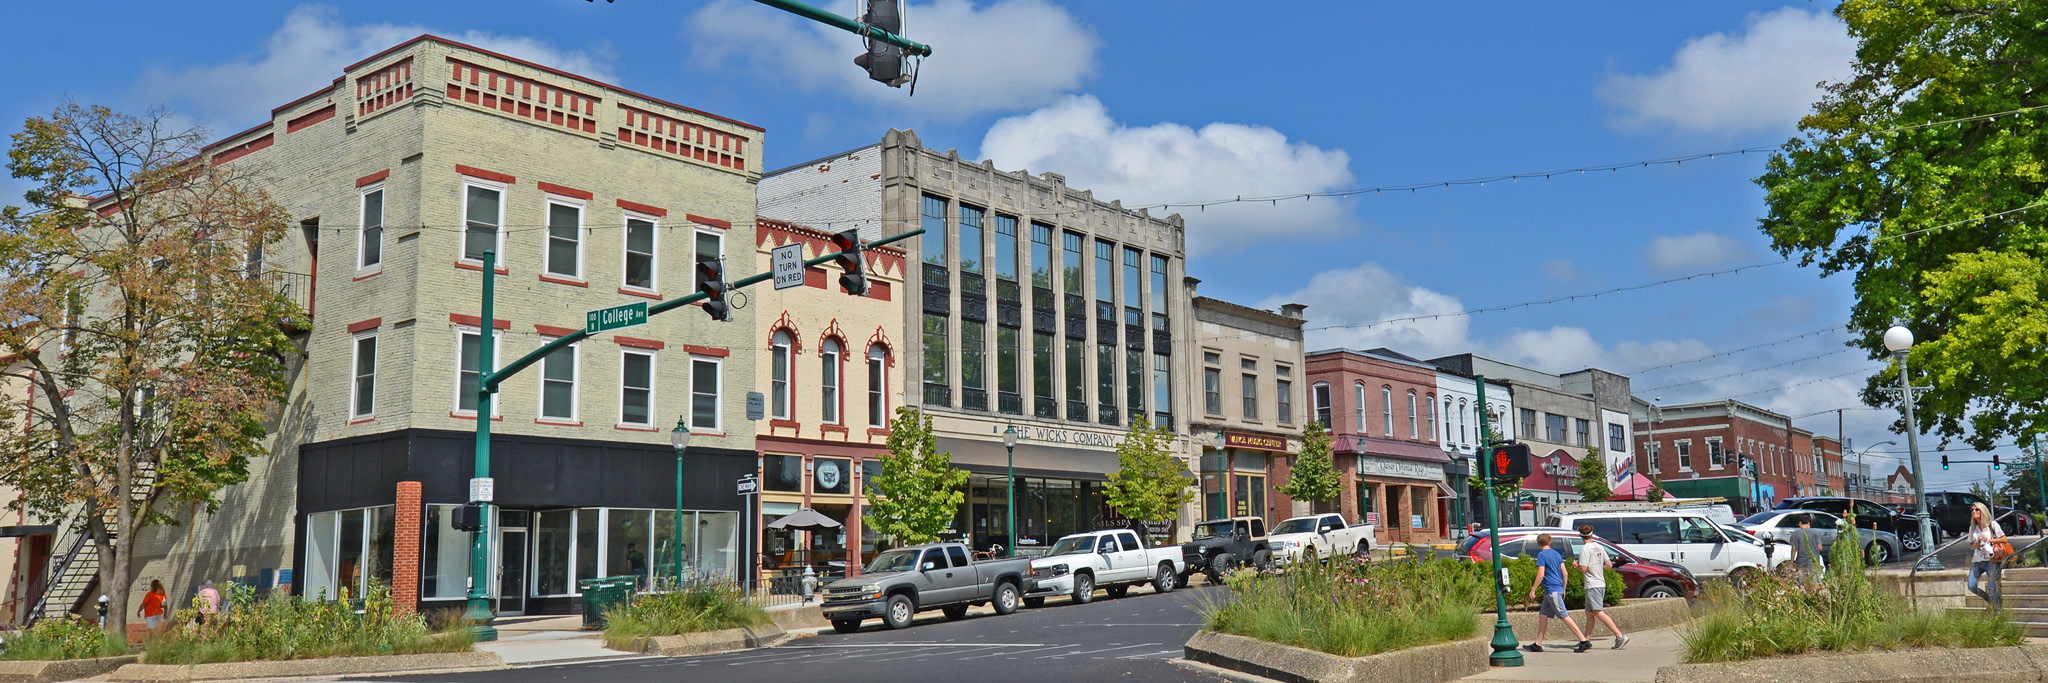 W. 6th Street shops on Bloomington’s Historic Downtown Square.